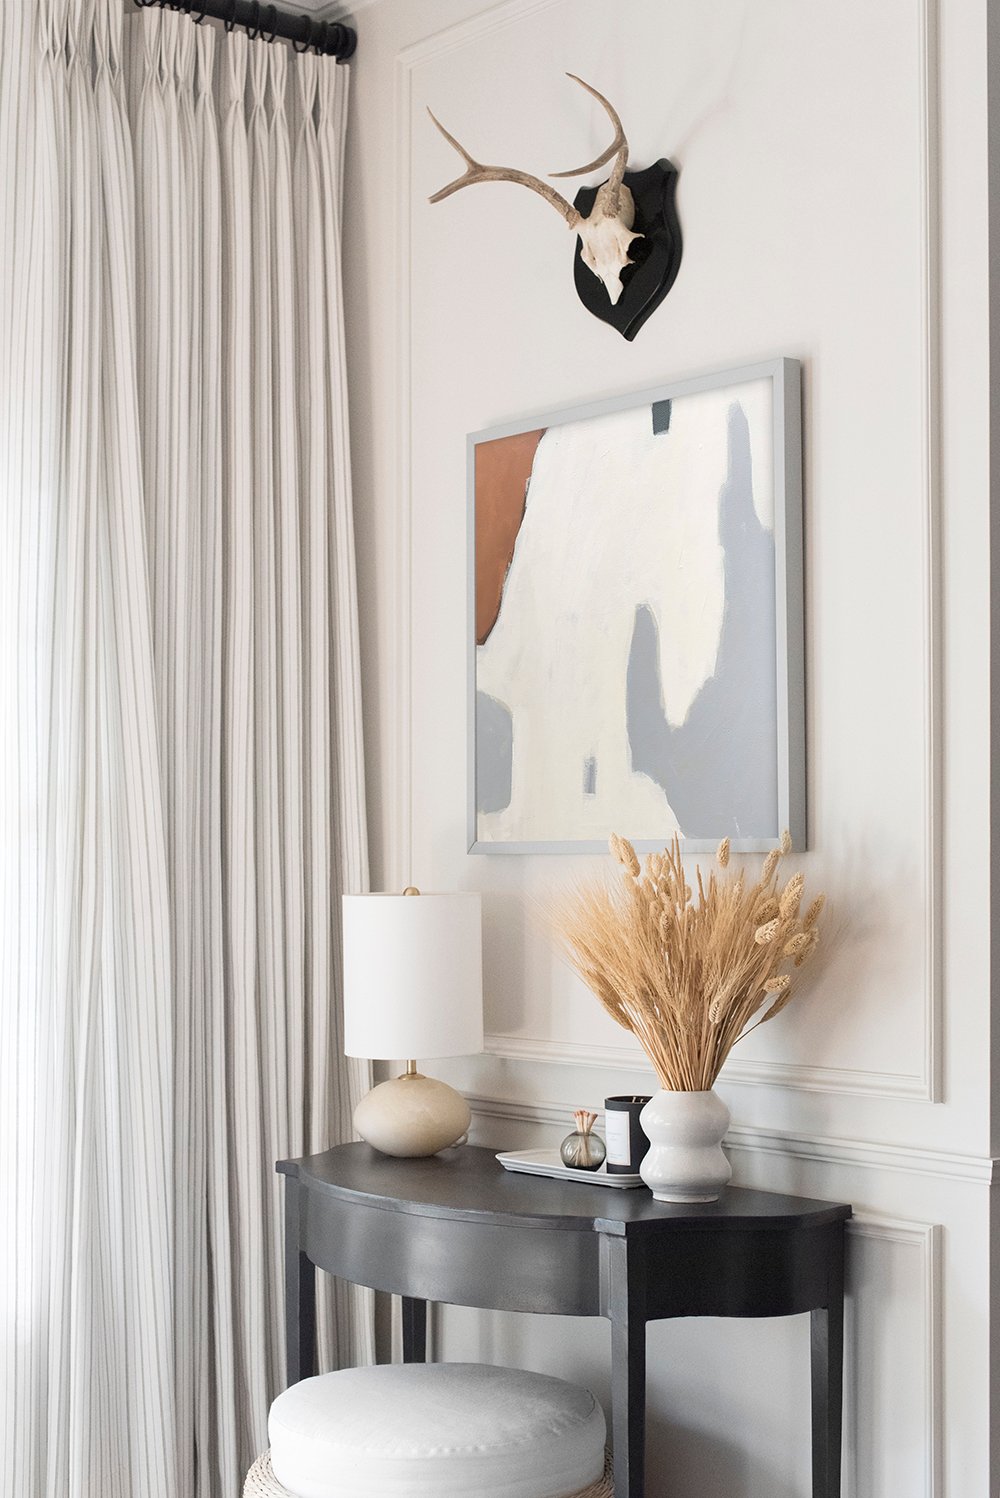 My Top 5 Foundation Pieces for Interior Styling - roomfortuesday.com